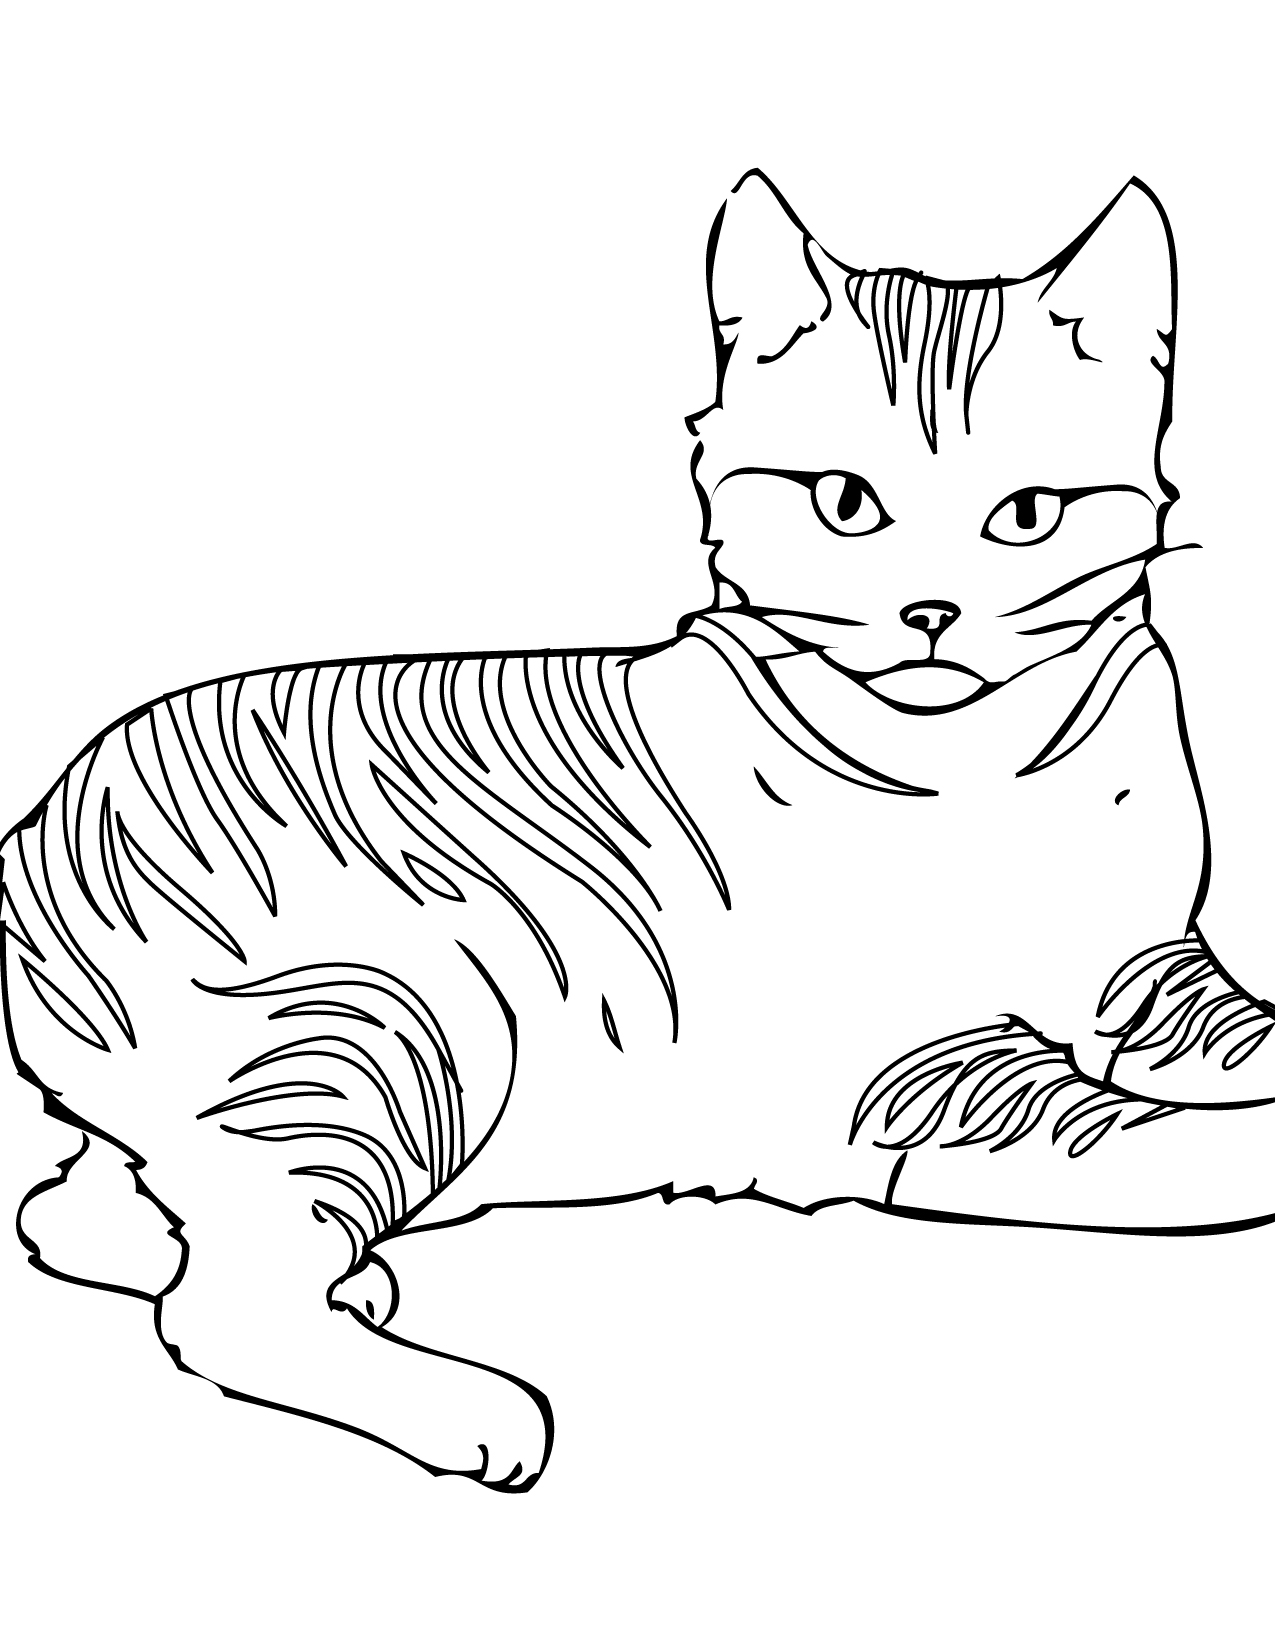 coloring pictures of cats cat coloring sheets cat coloring page animal coloring pictures cats of coloring 